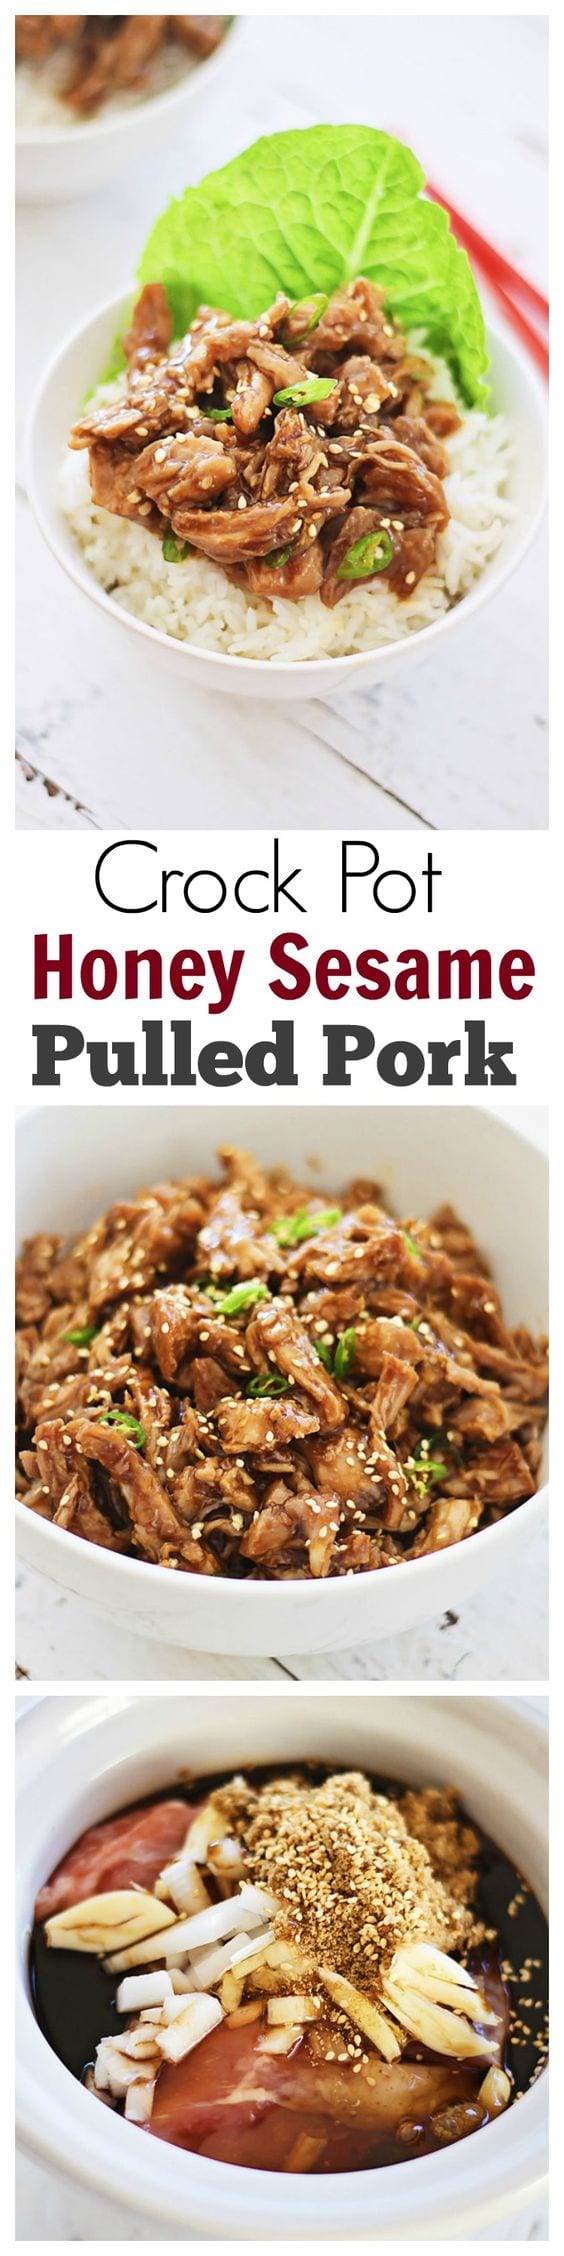 Crock Pot Honey Sesame Pulled Pork - the easiest and best pulled pork recipe made with a crock pot, in an amazing honey sesame sauce | rasamalaysia.com